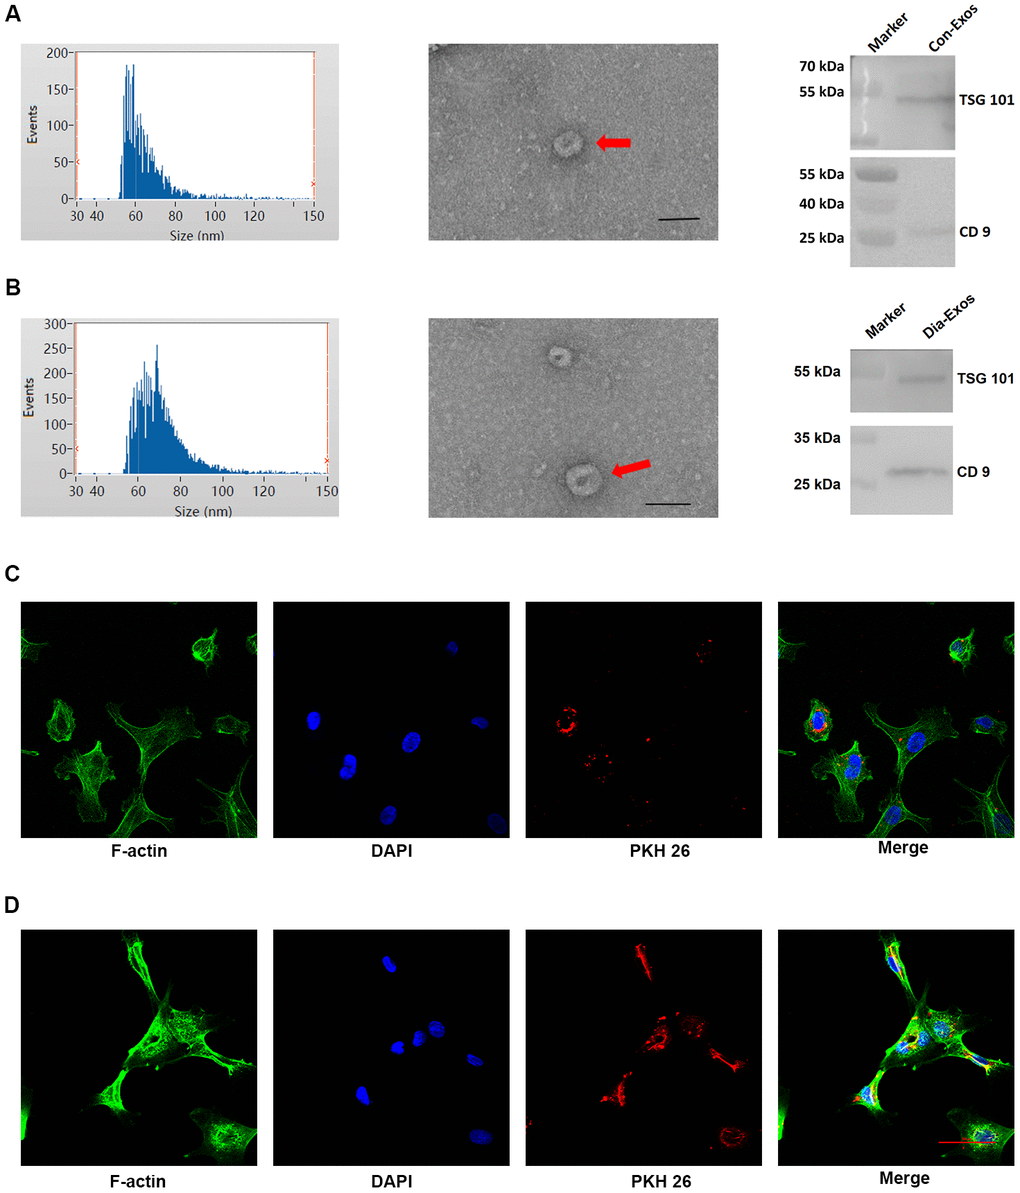 Features of exosomes derived from non-diabetic and diabetic patients. (A) DLS results, TEM images and WB results of Con-Exos. (B) DLS results, TEM images and WB results of Dia-Exos; scale bar: 100 nm. (C) PKH26-labeled Con-Exos were absorbed by HUVECs, as indicated by a red fluorescent signal. (D) PKH26-labeled Dia-Exos were taken up by HUVECs, as indicated by a red fluorescent signal.